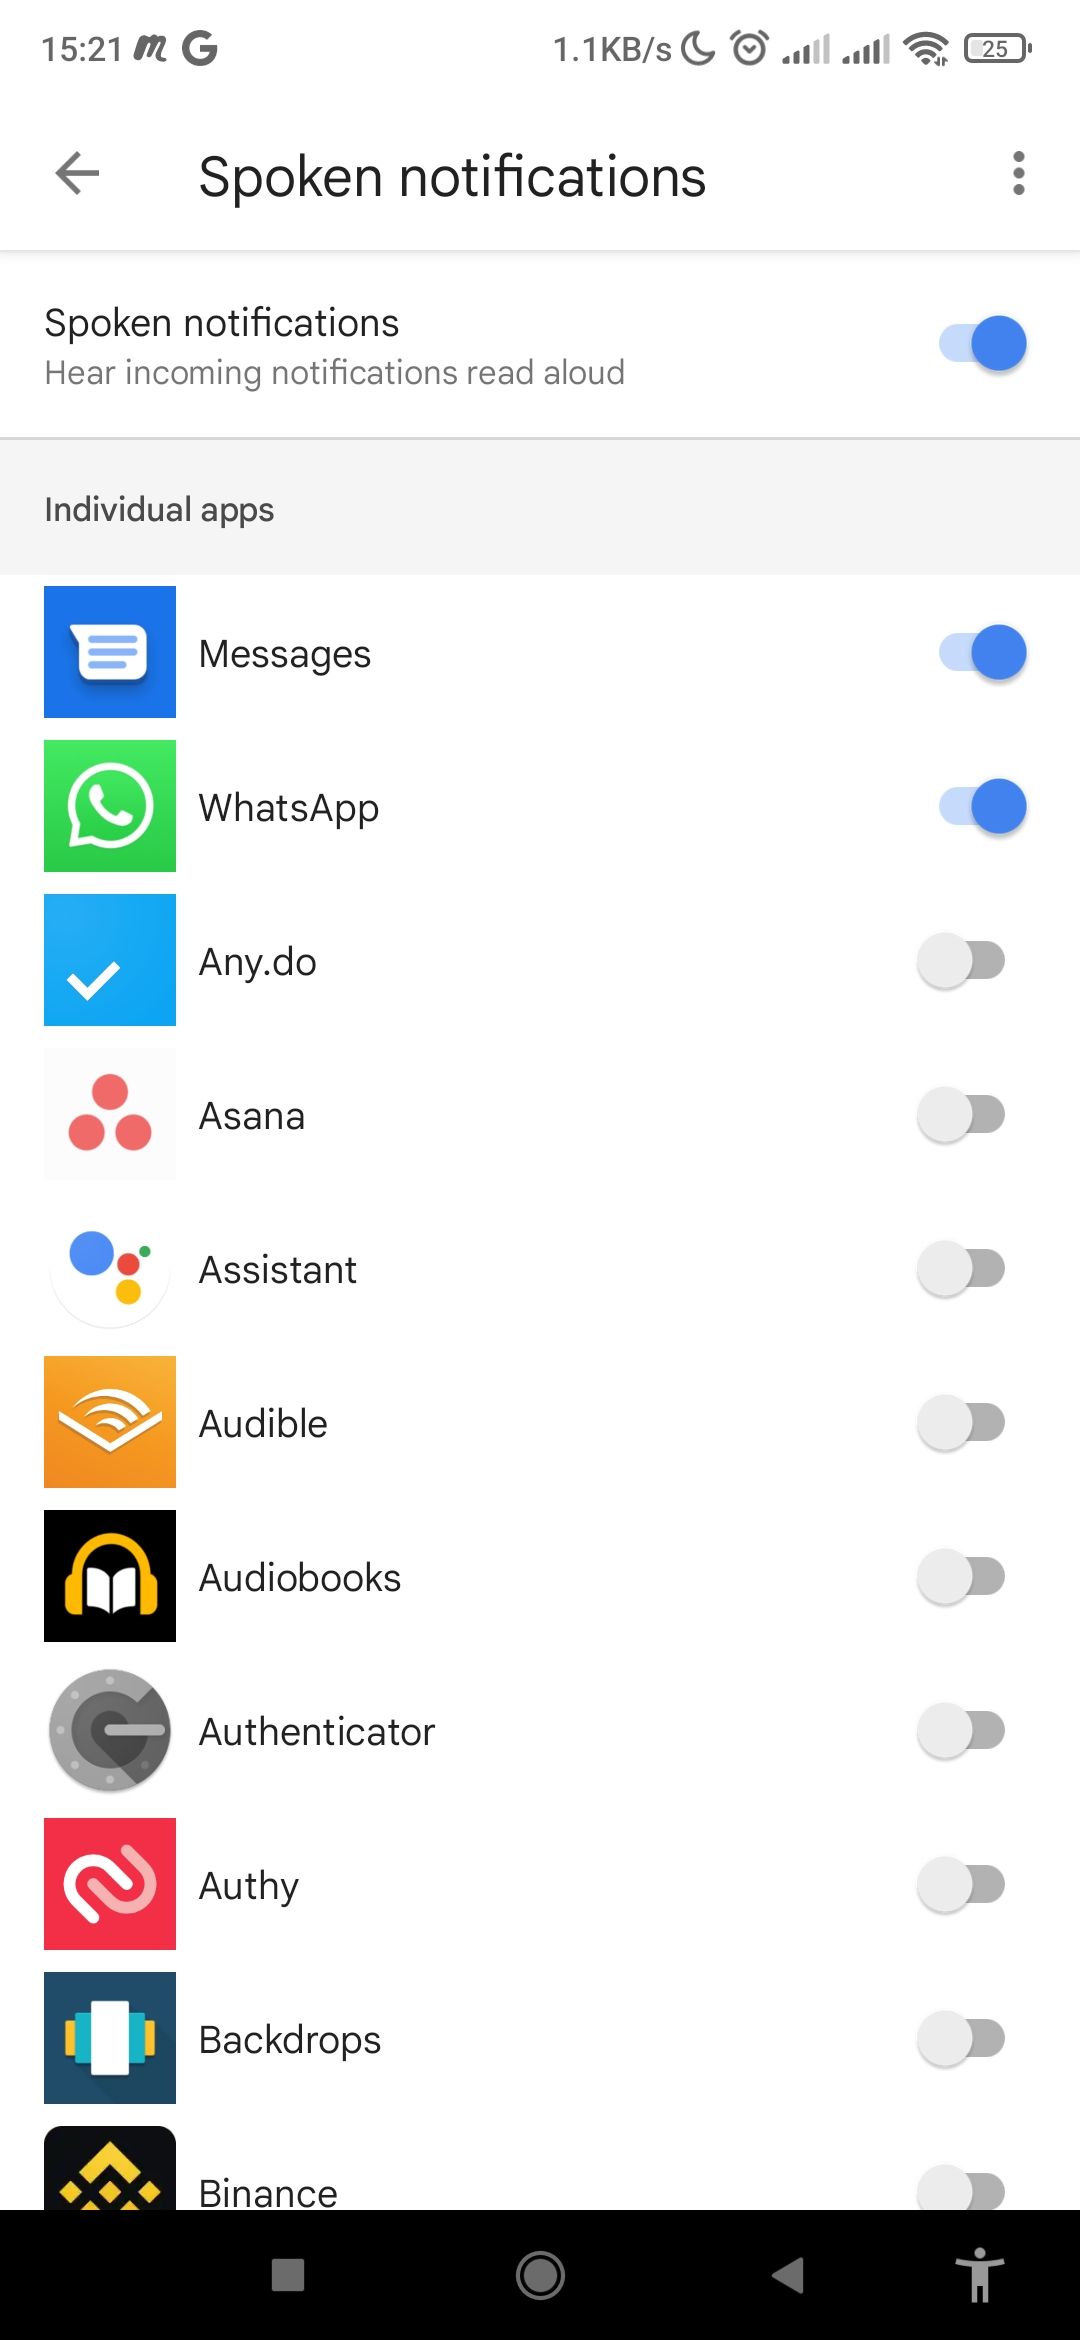 Choosing apps to work with Spoken notifications